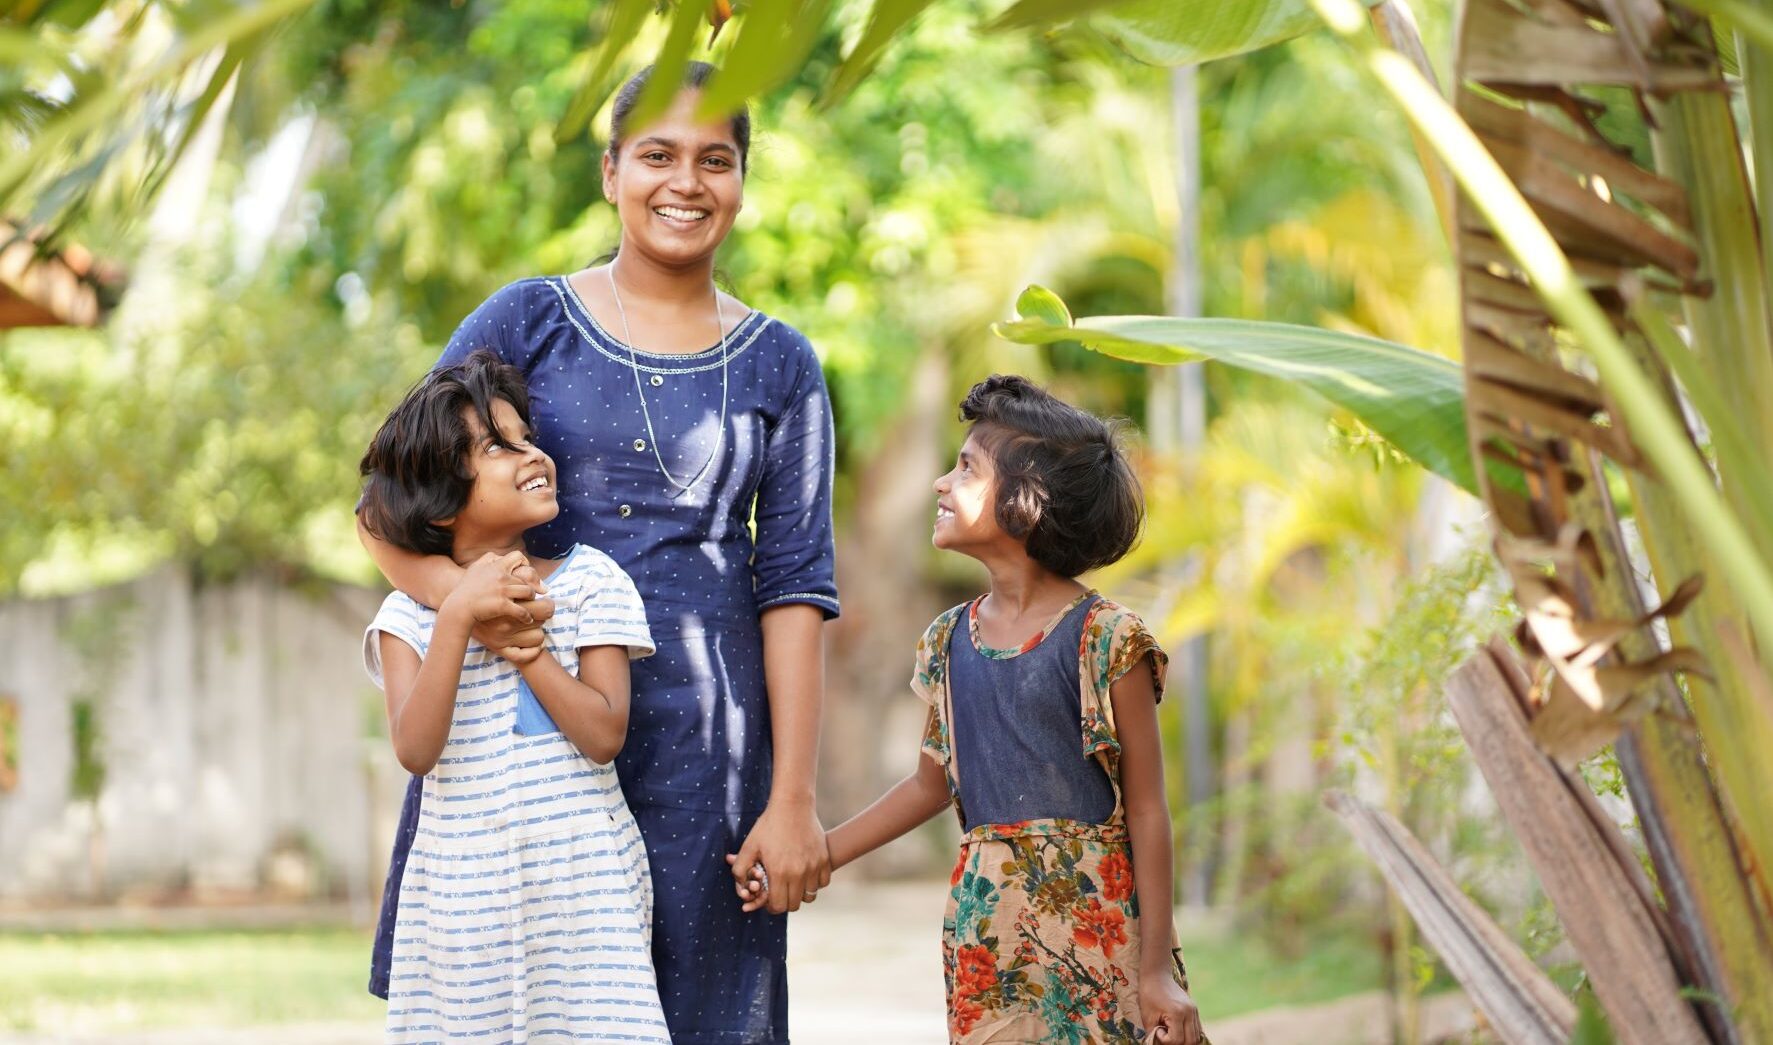 Renosha, a girl in Sri Lanka, with kids from the orphanage